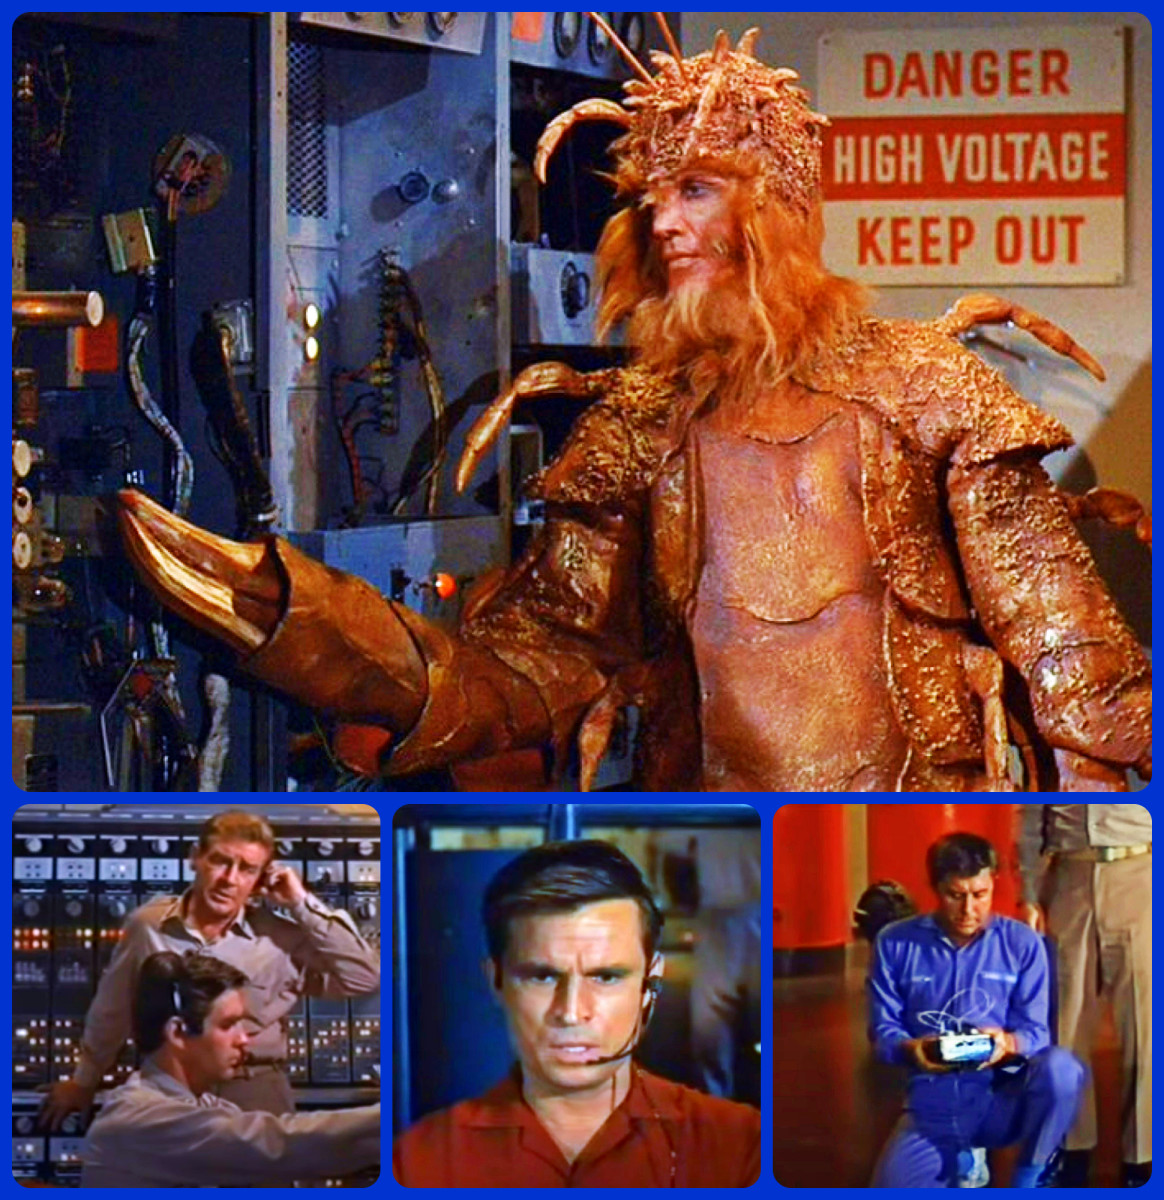 The Lobster Man, Voyage to the Bottom of the Sea, Aired 01/ 21/1968, Richard Basehart, David Hedison & Victor Lundin